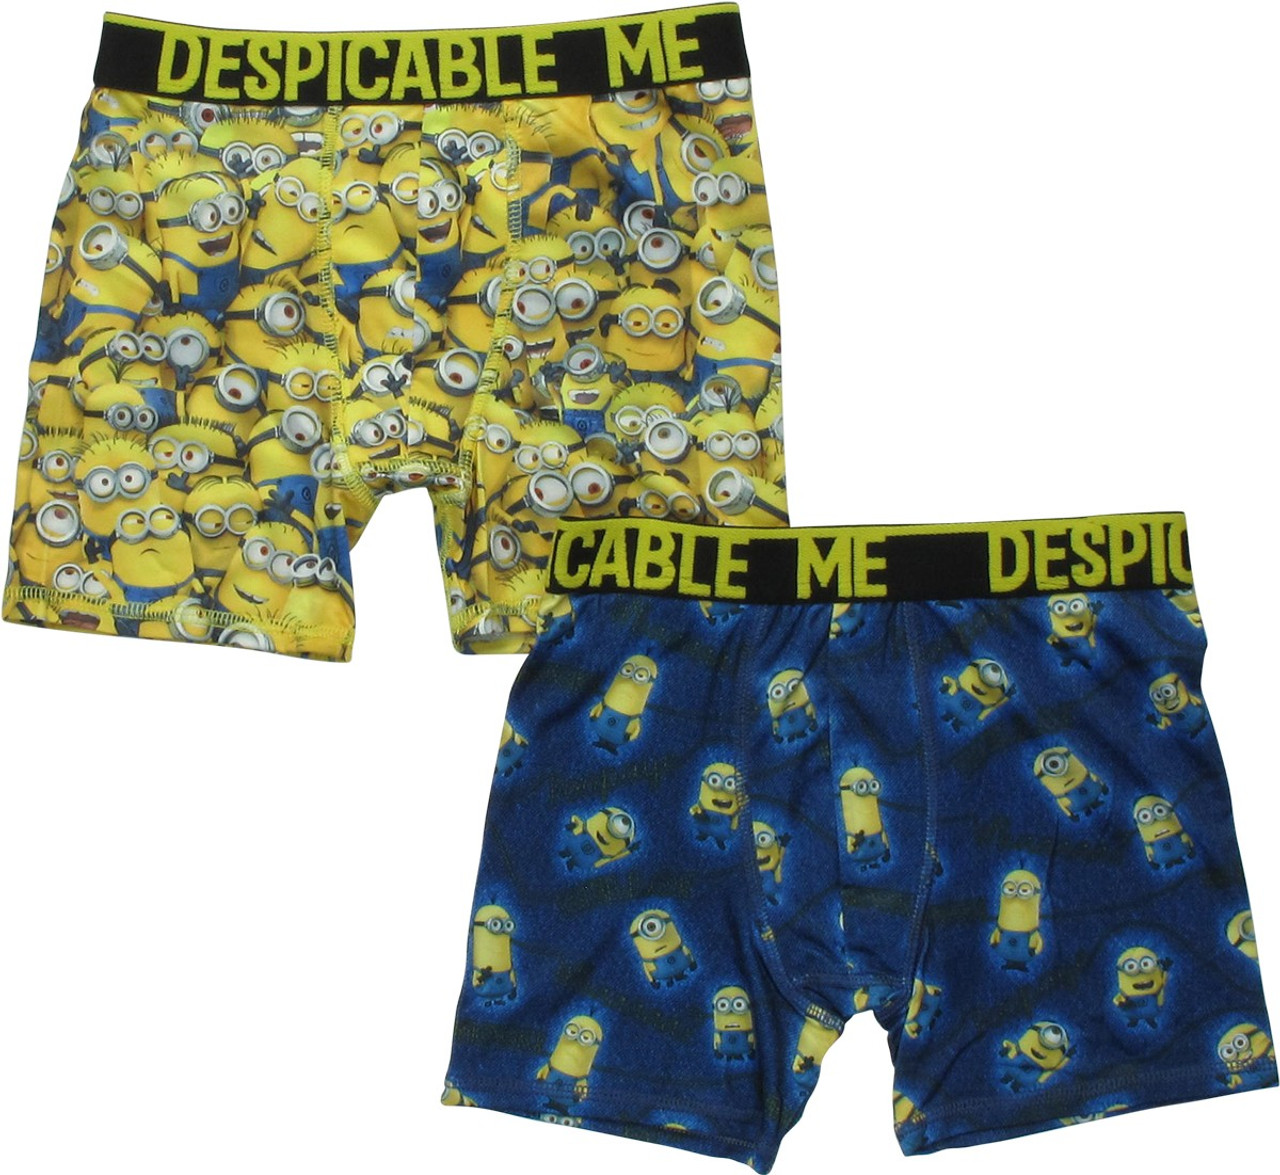 https://cdn11.bigcommerce.com/s-kjvm95bh8i/images/stencil/1280x1280/products/79111/129253/boxer-despicable-me-bello-2pk-youth__99063.1624913665.jpg?c=2